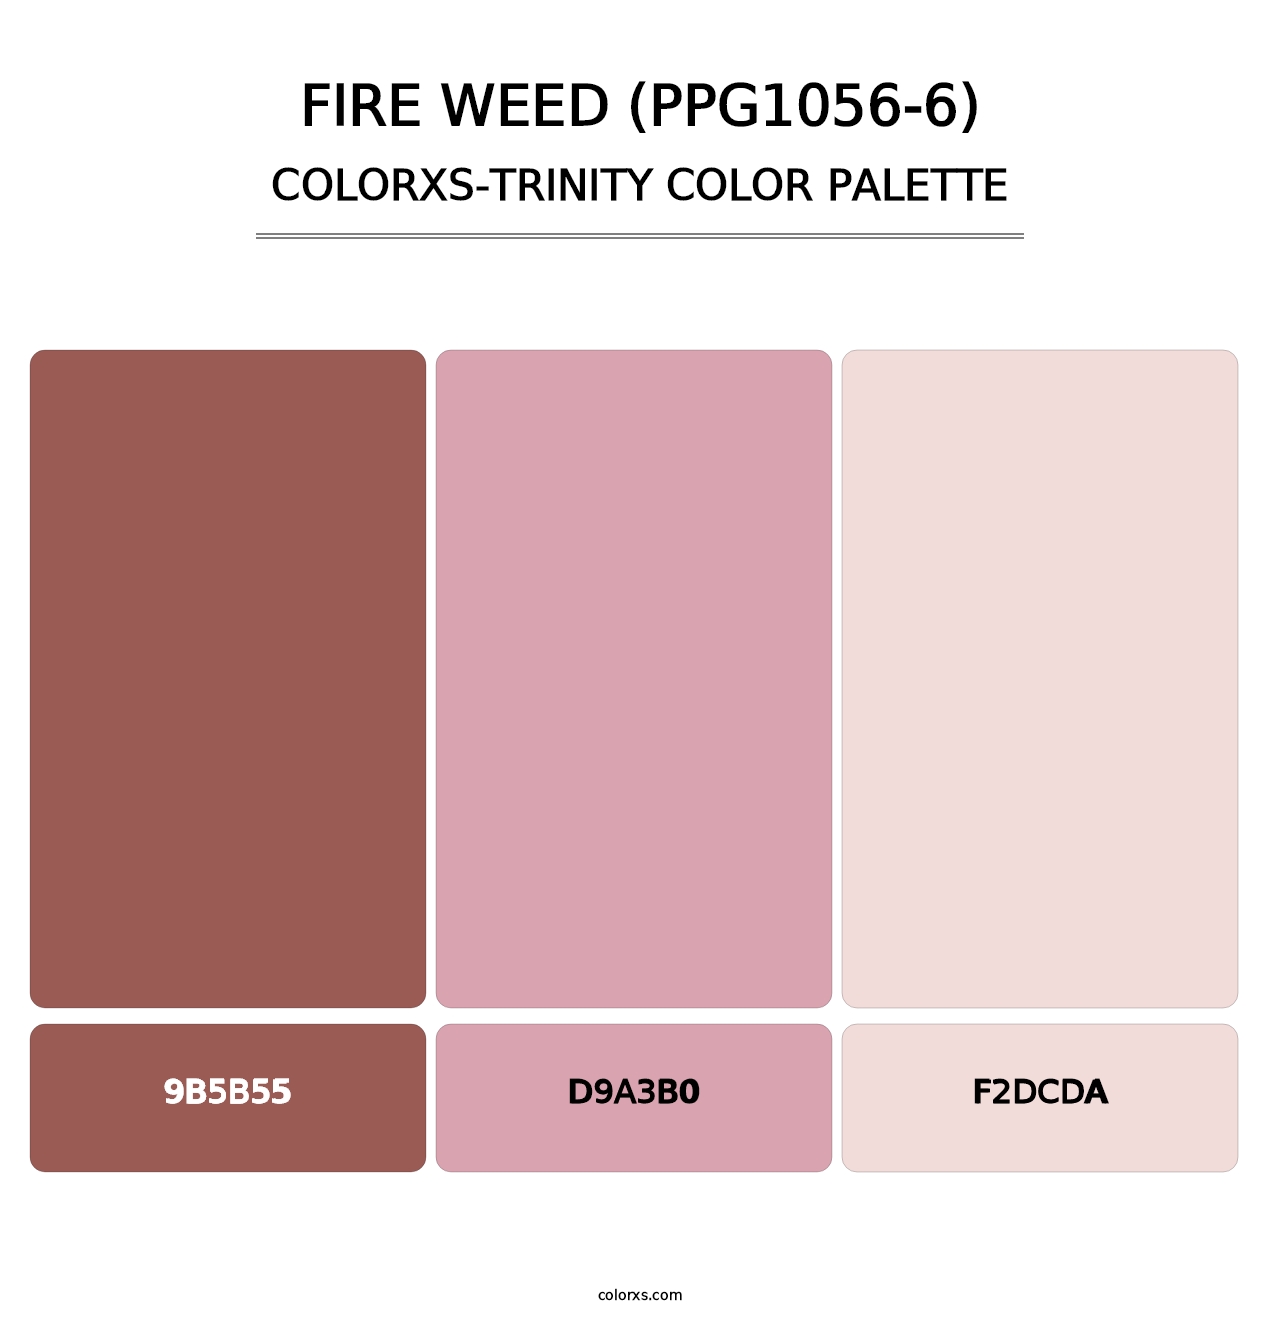 Fire Weed (PPG1056-6) - Colorxs Trinity Palette